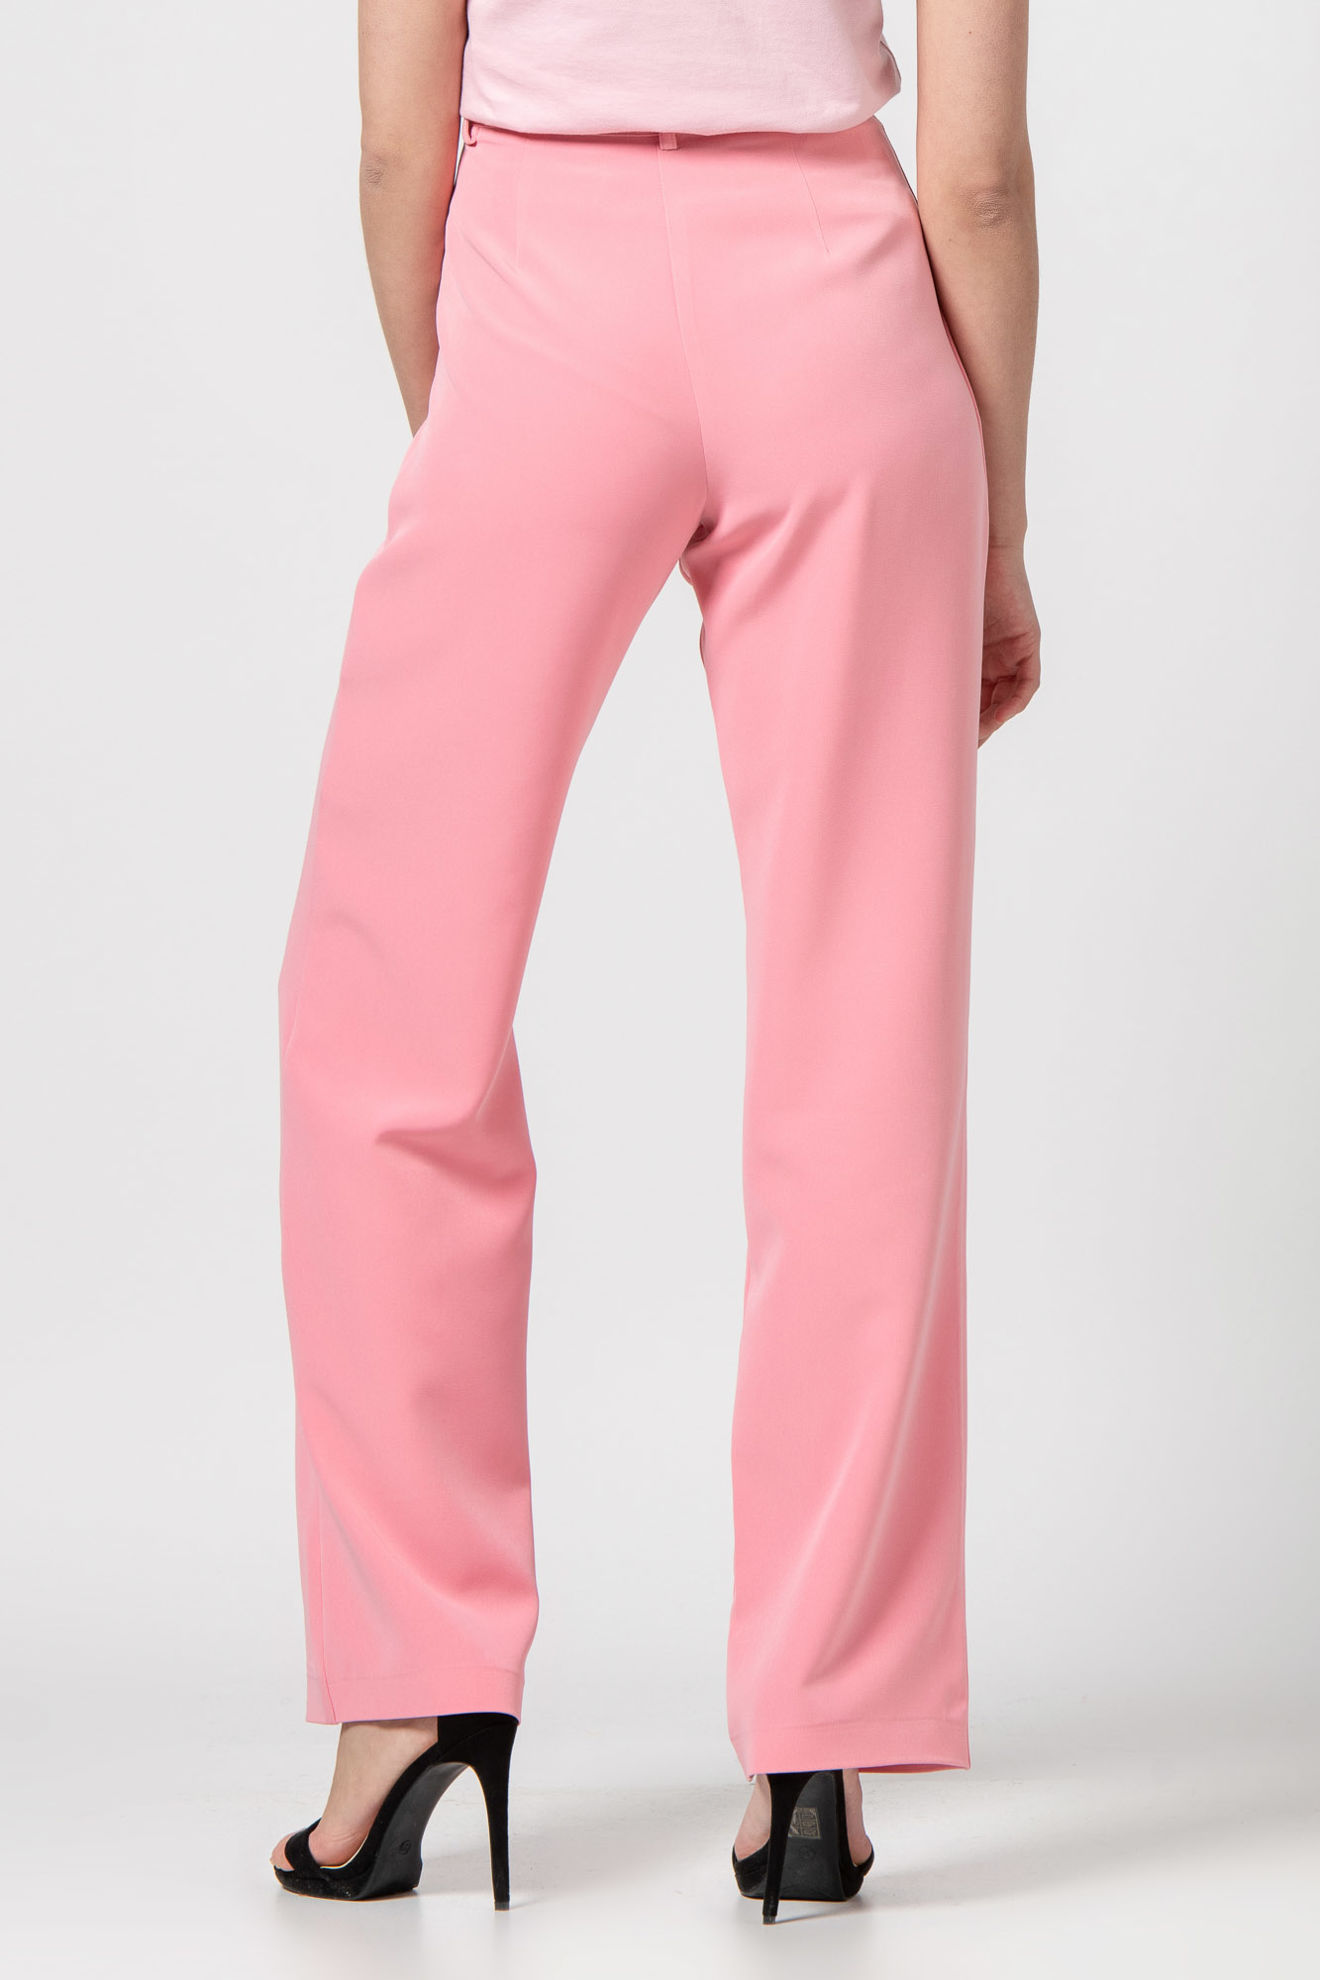 Picture of Highwaisted suit pants